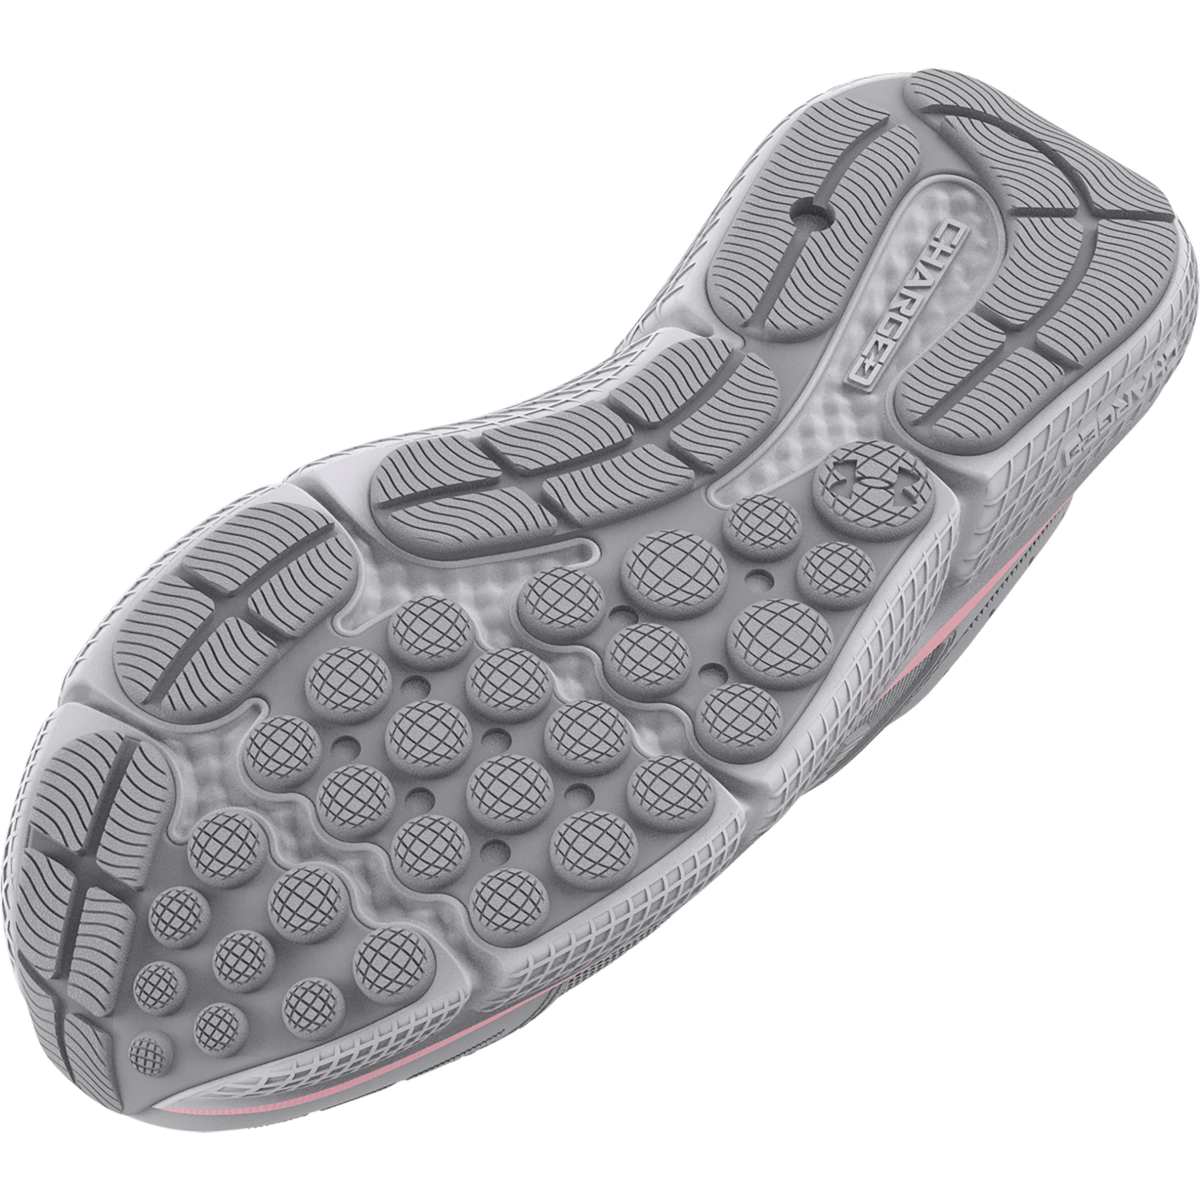 s7.3026189-102_SOLE